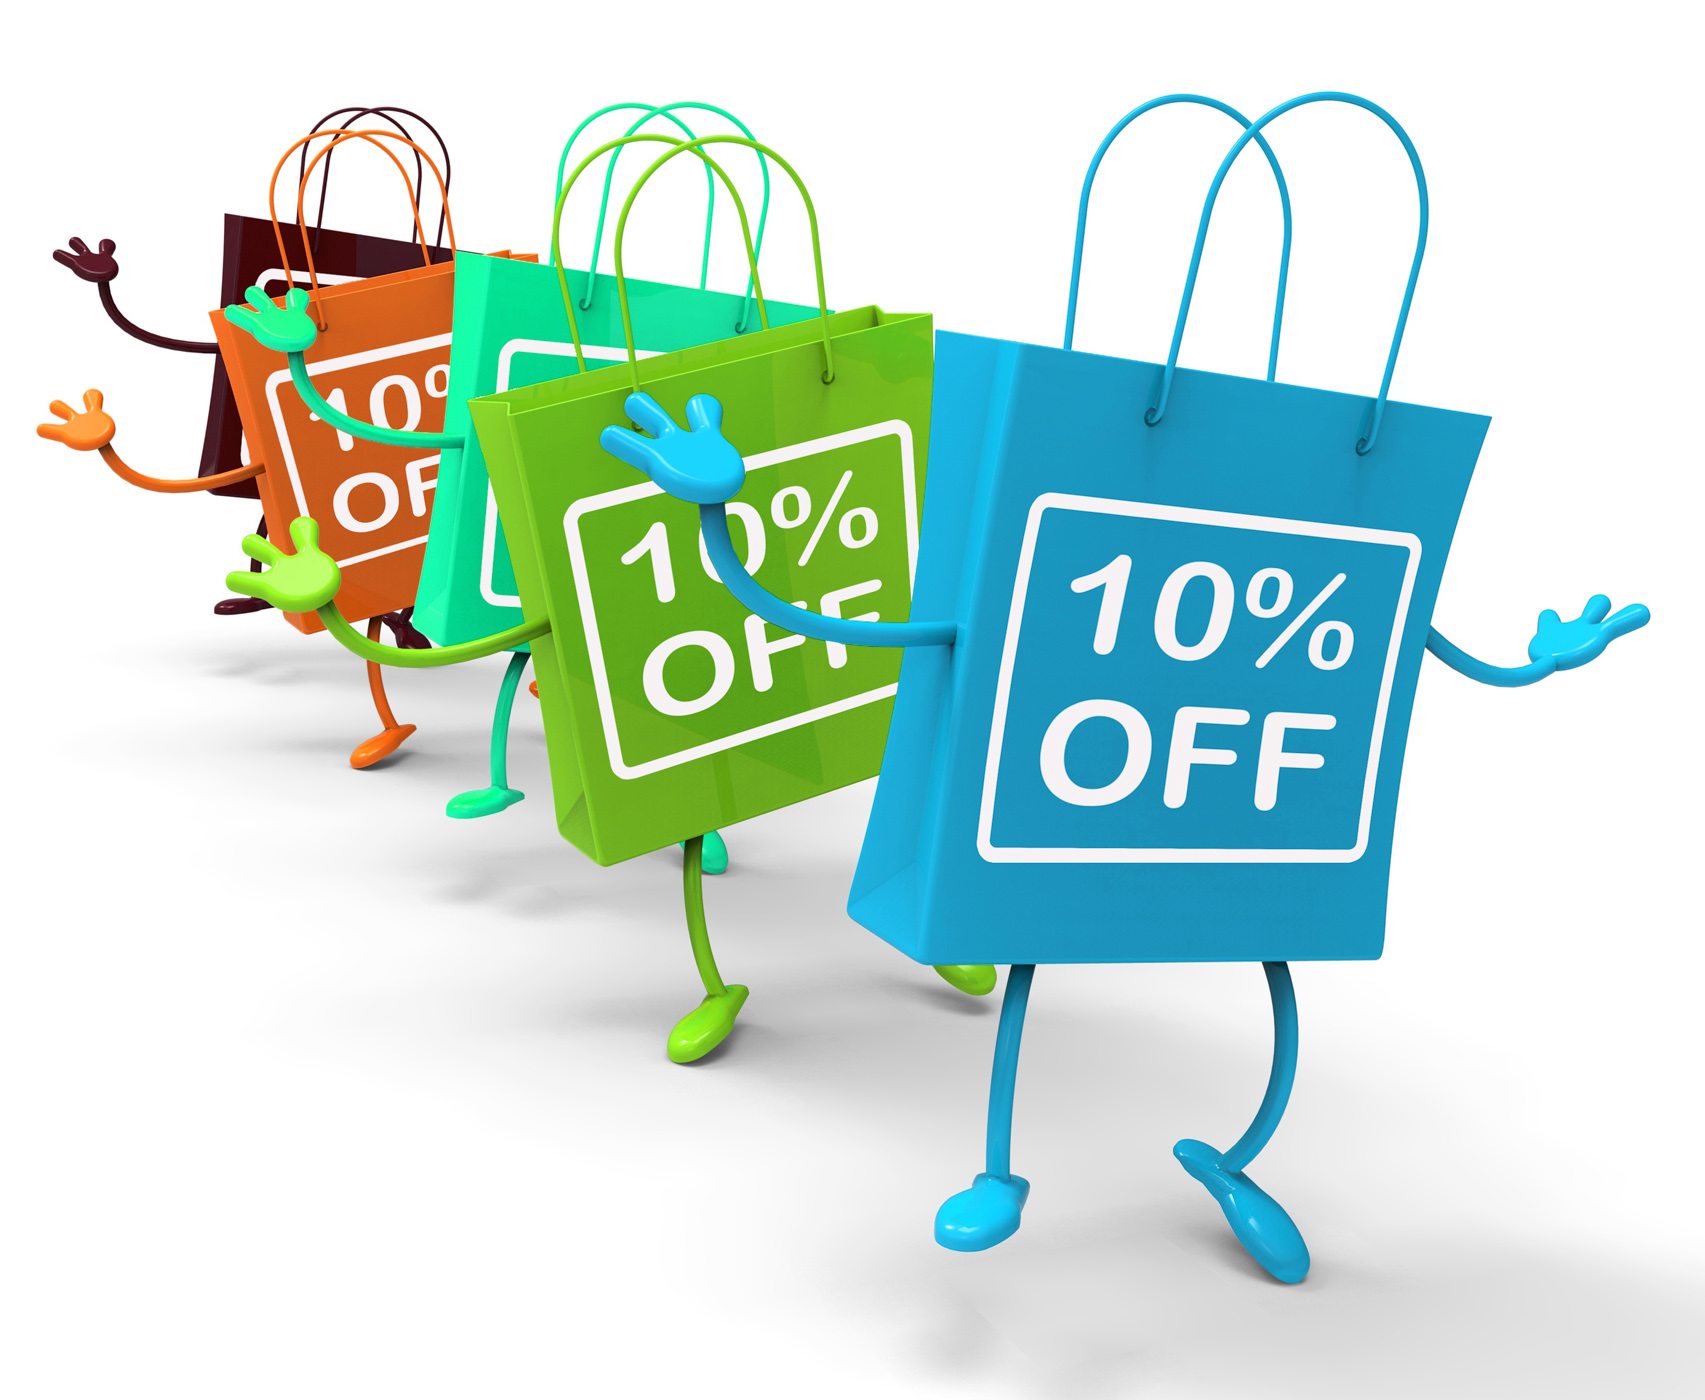 Ten Percent Off On Colored Shopping Bags Show Bargains, 10off, Sign, Savings, Saving, HQ Photo